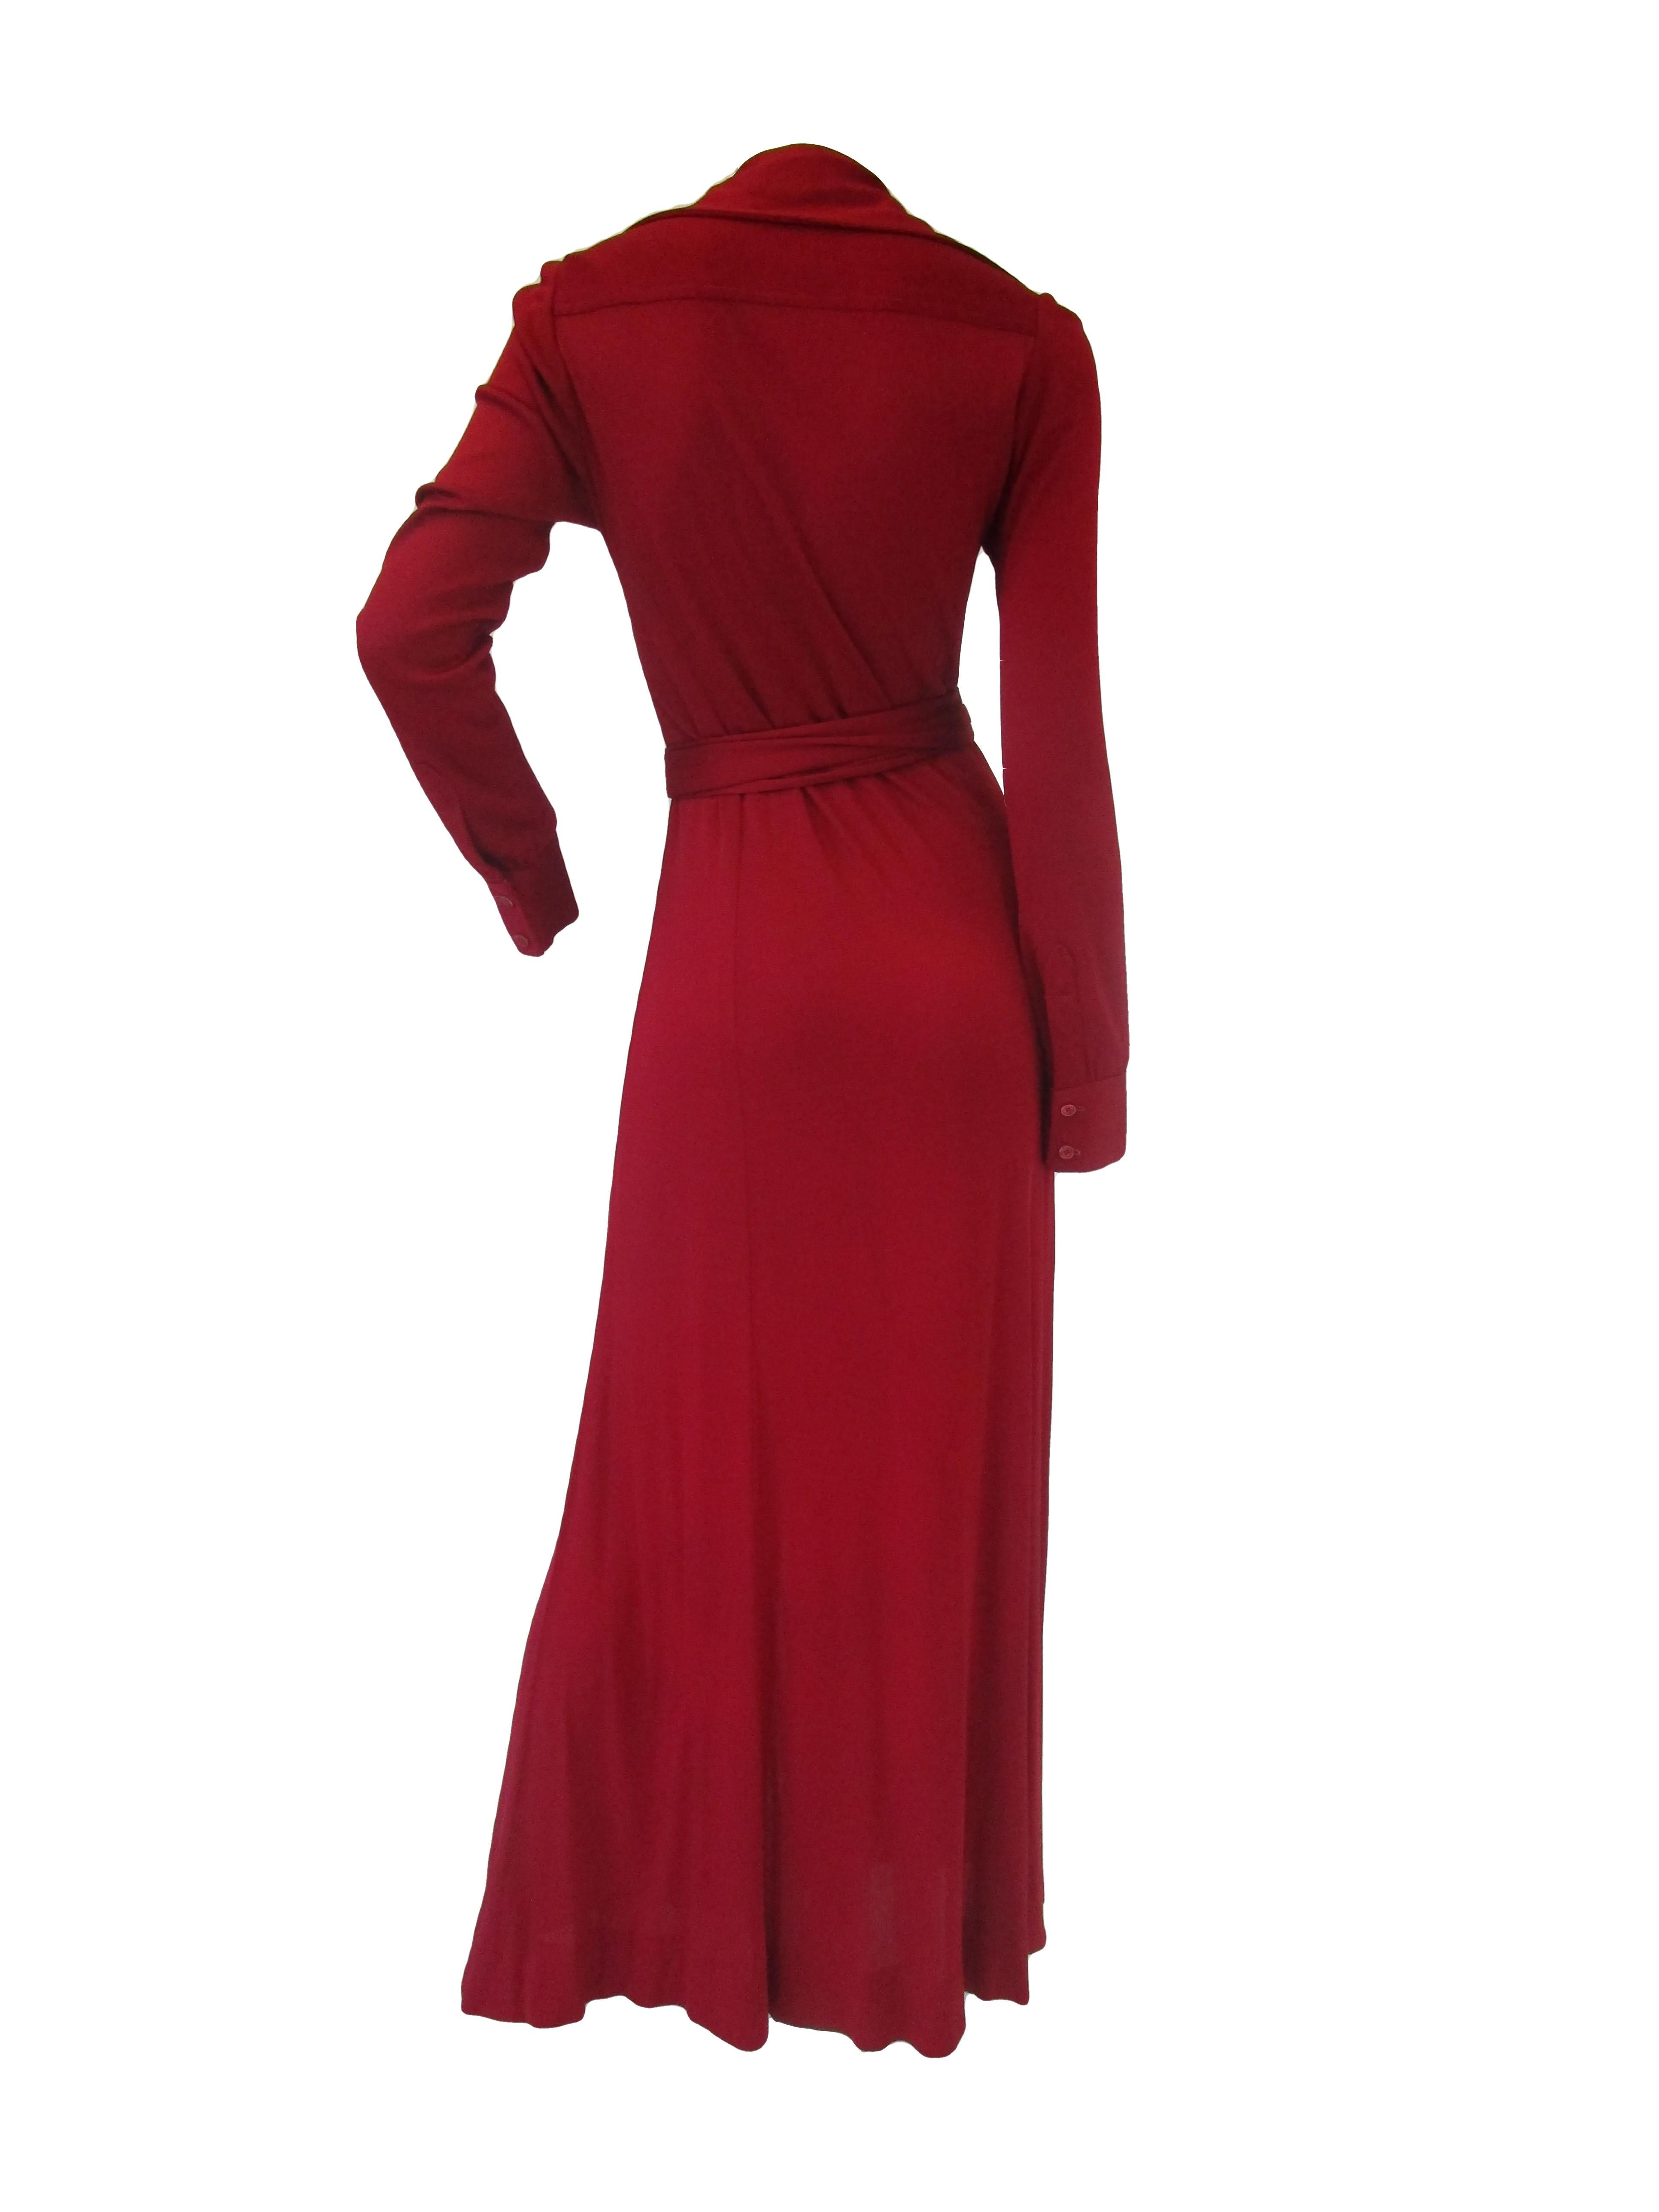 1972 Halston Red Jersey Knit Maxi Dress  For Sale 5